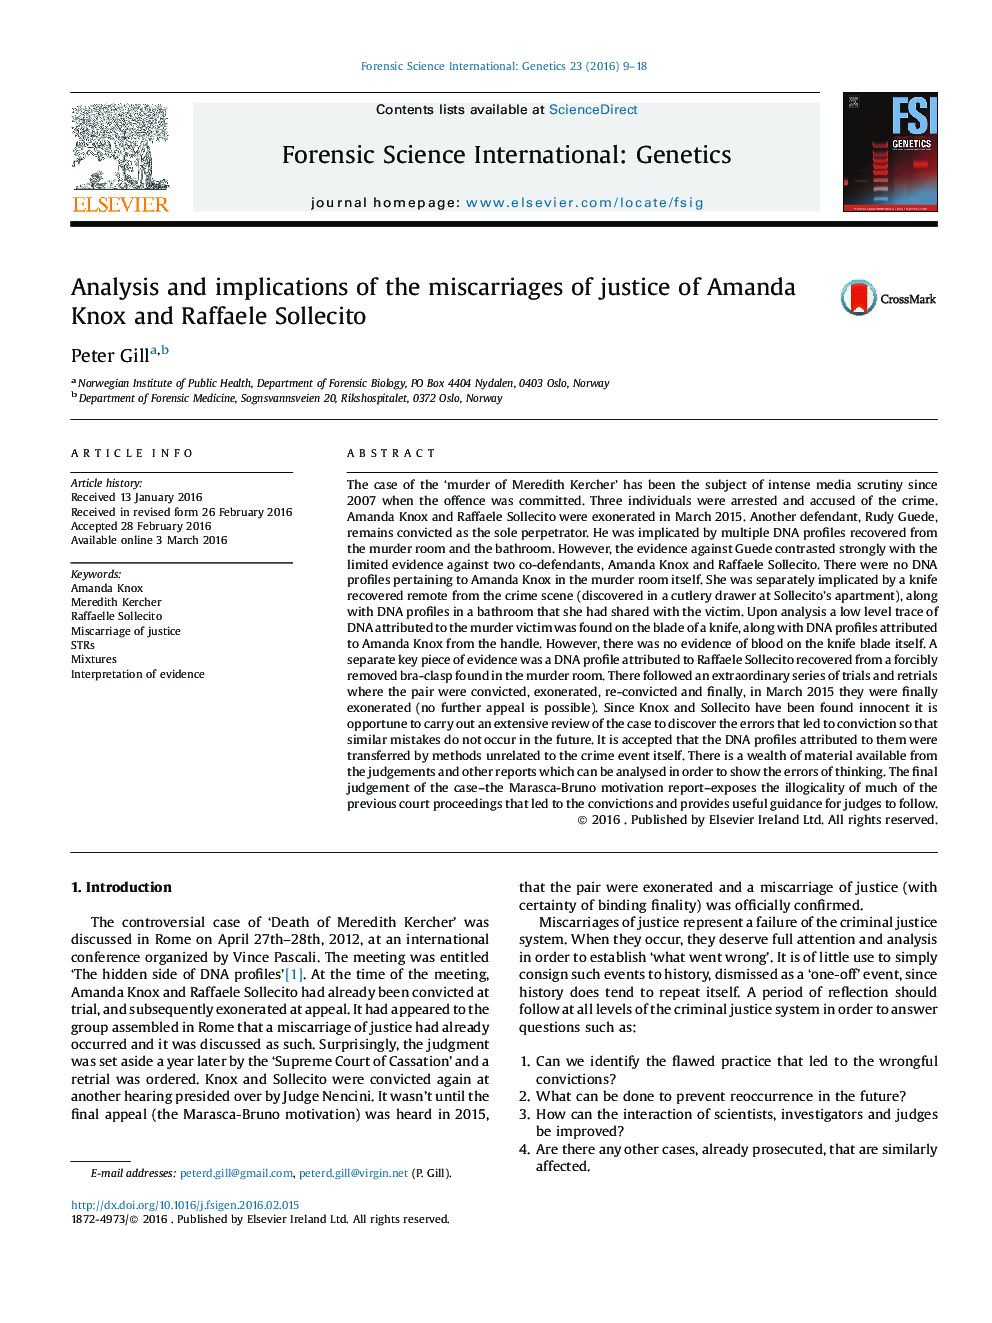 Analysis and implications of the miscarriages of justice of Amanda Knox and Raffaele Sollecito